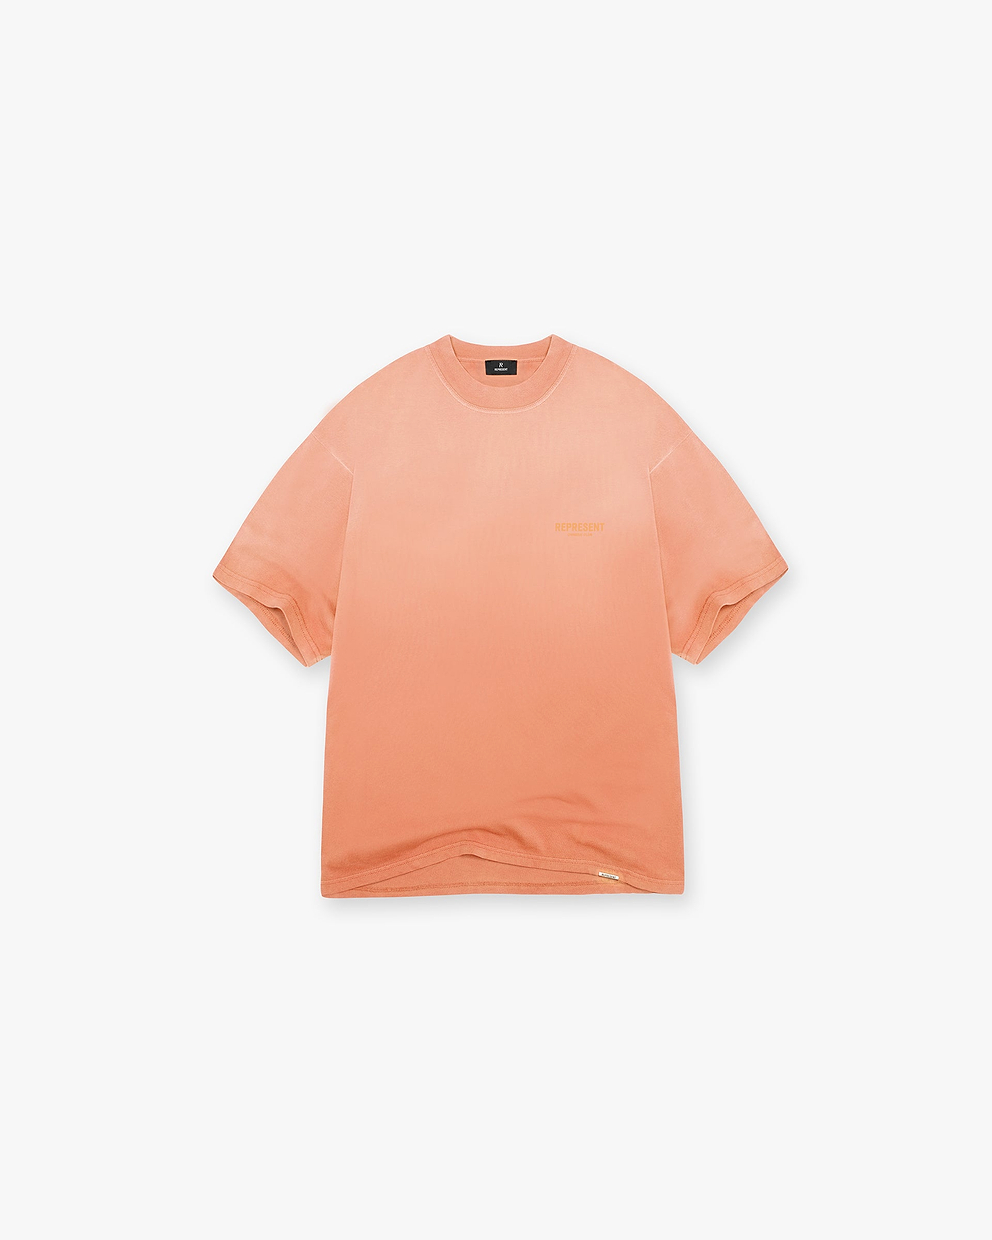 Represent Owners Club T-Shirt - Washed Coral